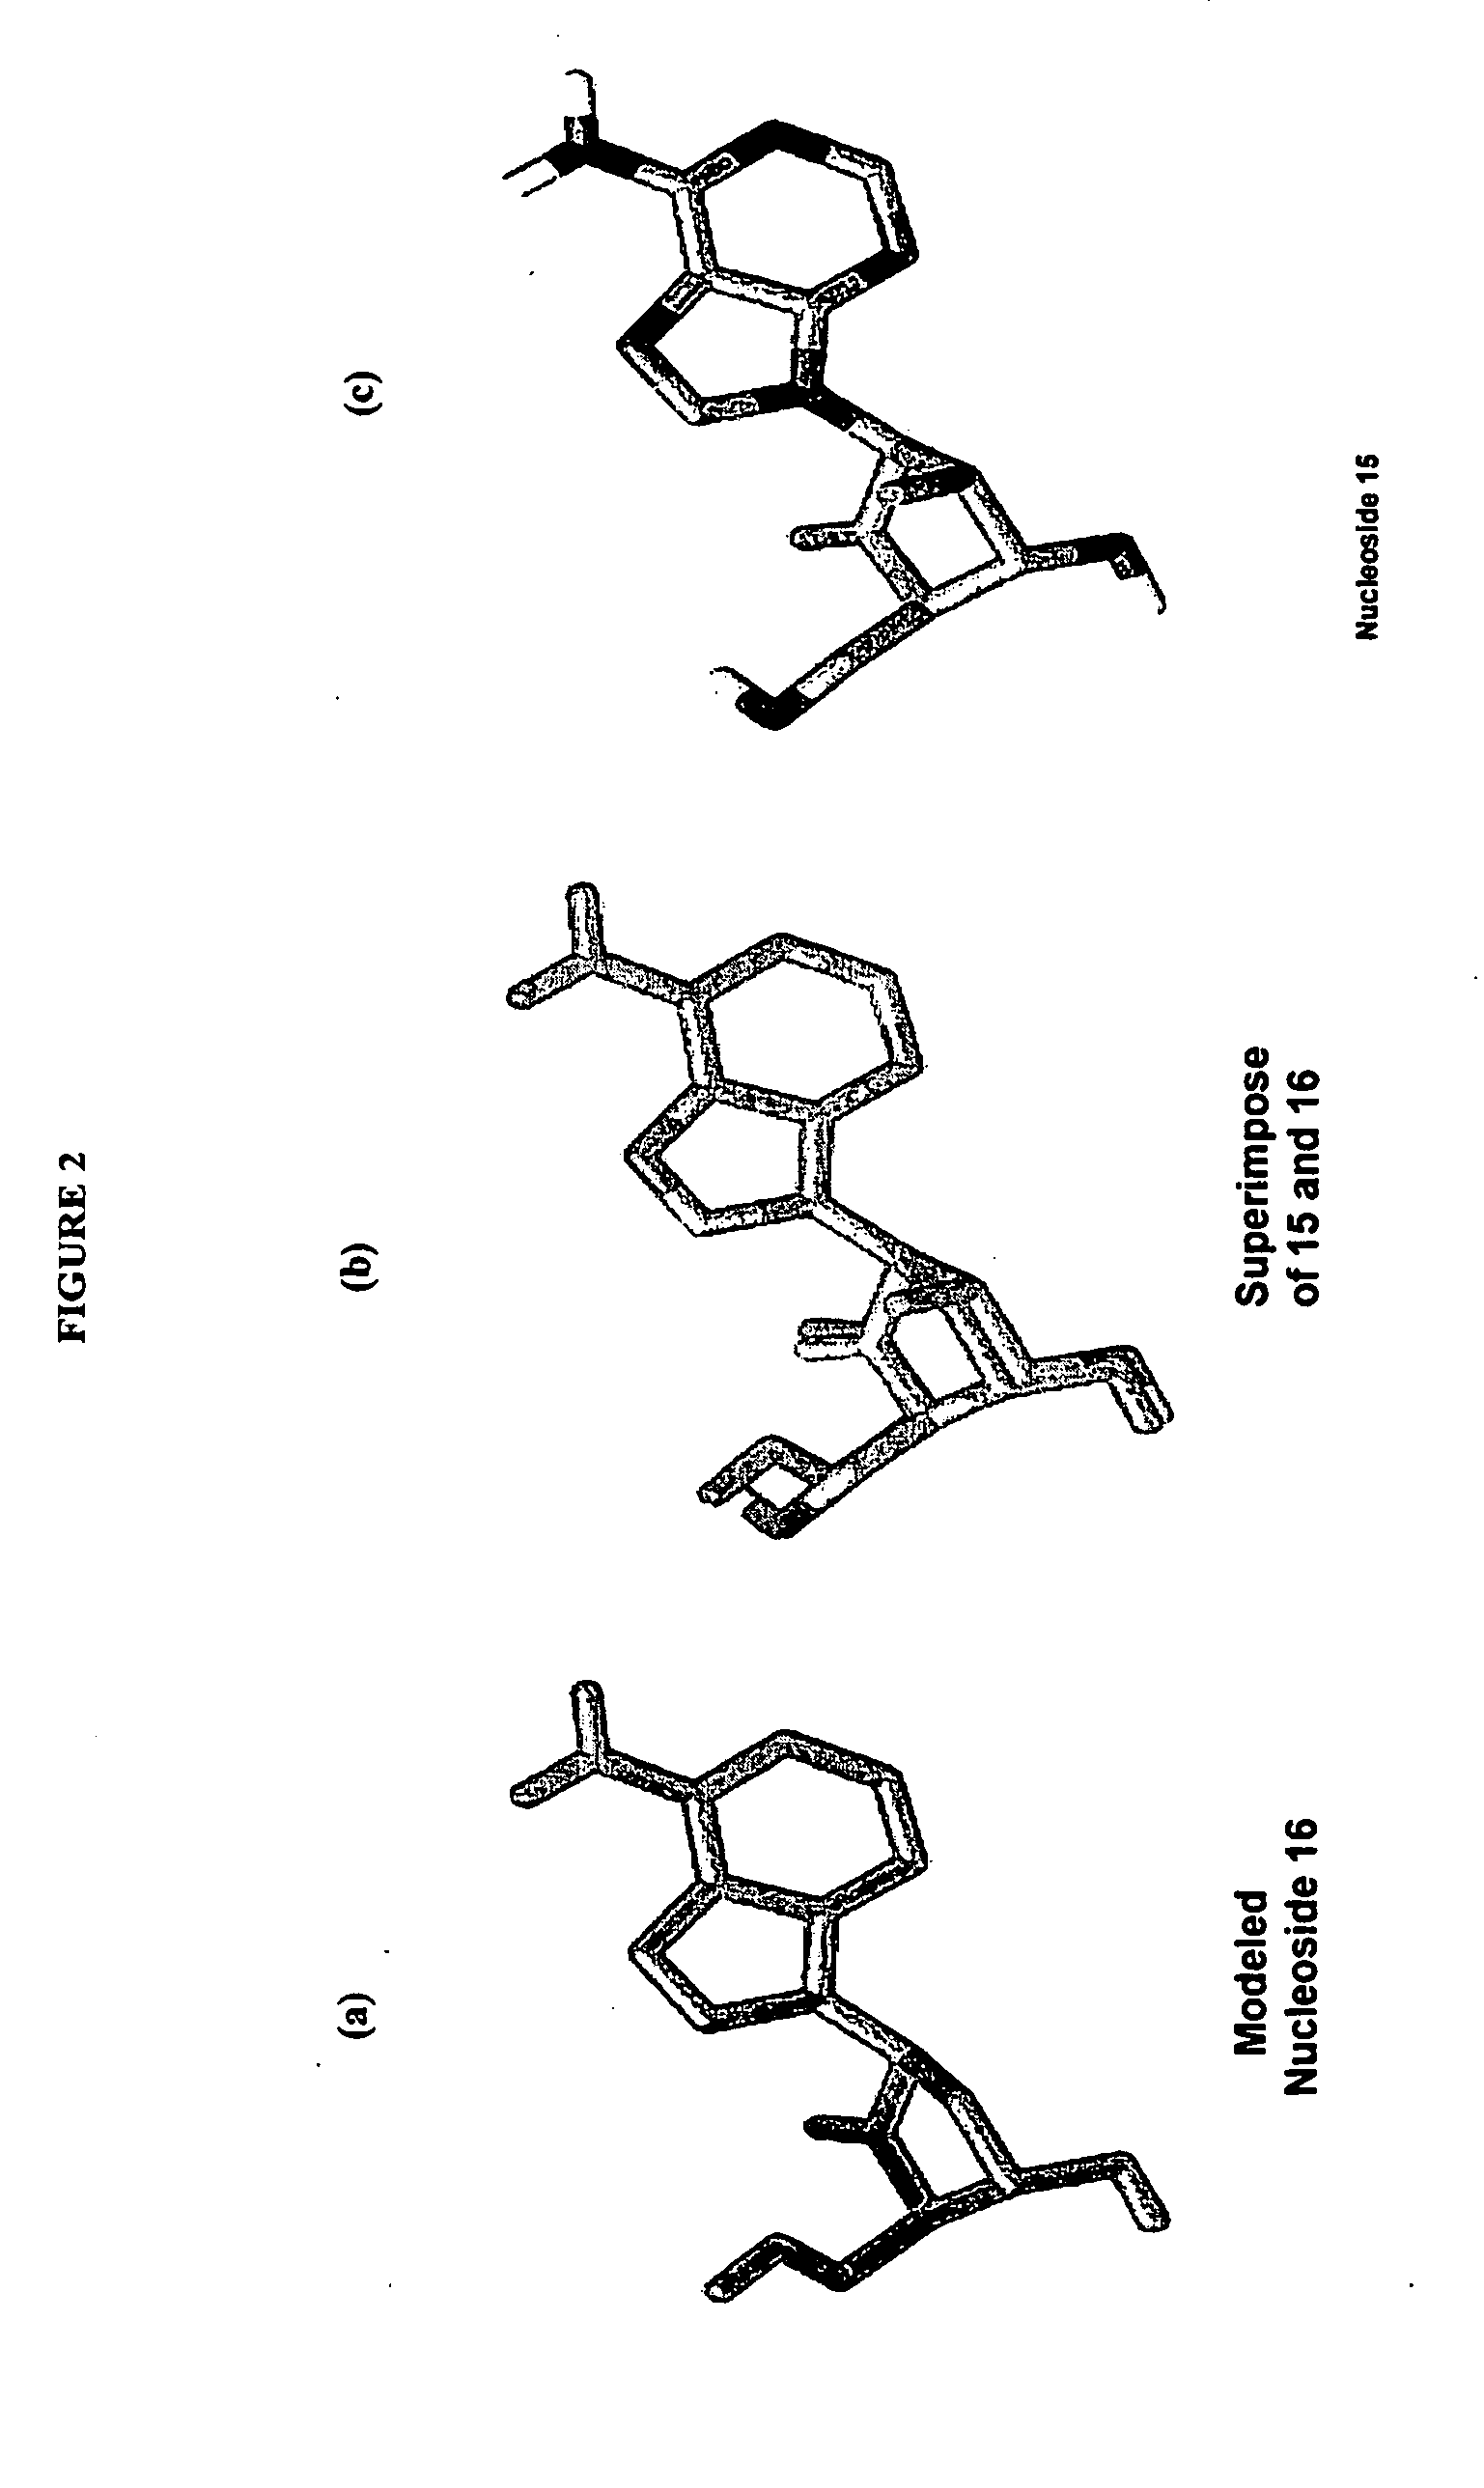 2'-fluoro-6'-methylene carbocyclic nucleosides and methods of treating viral infections